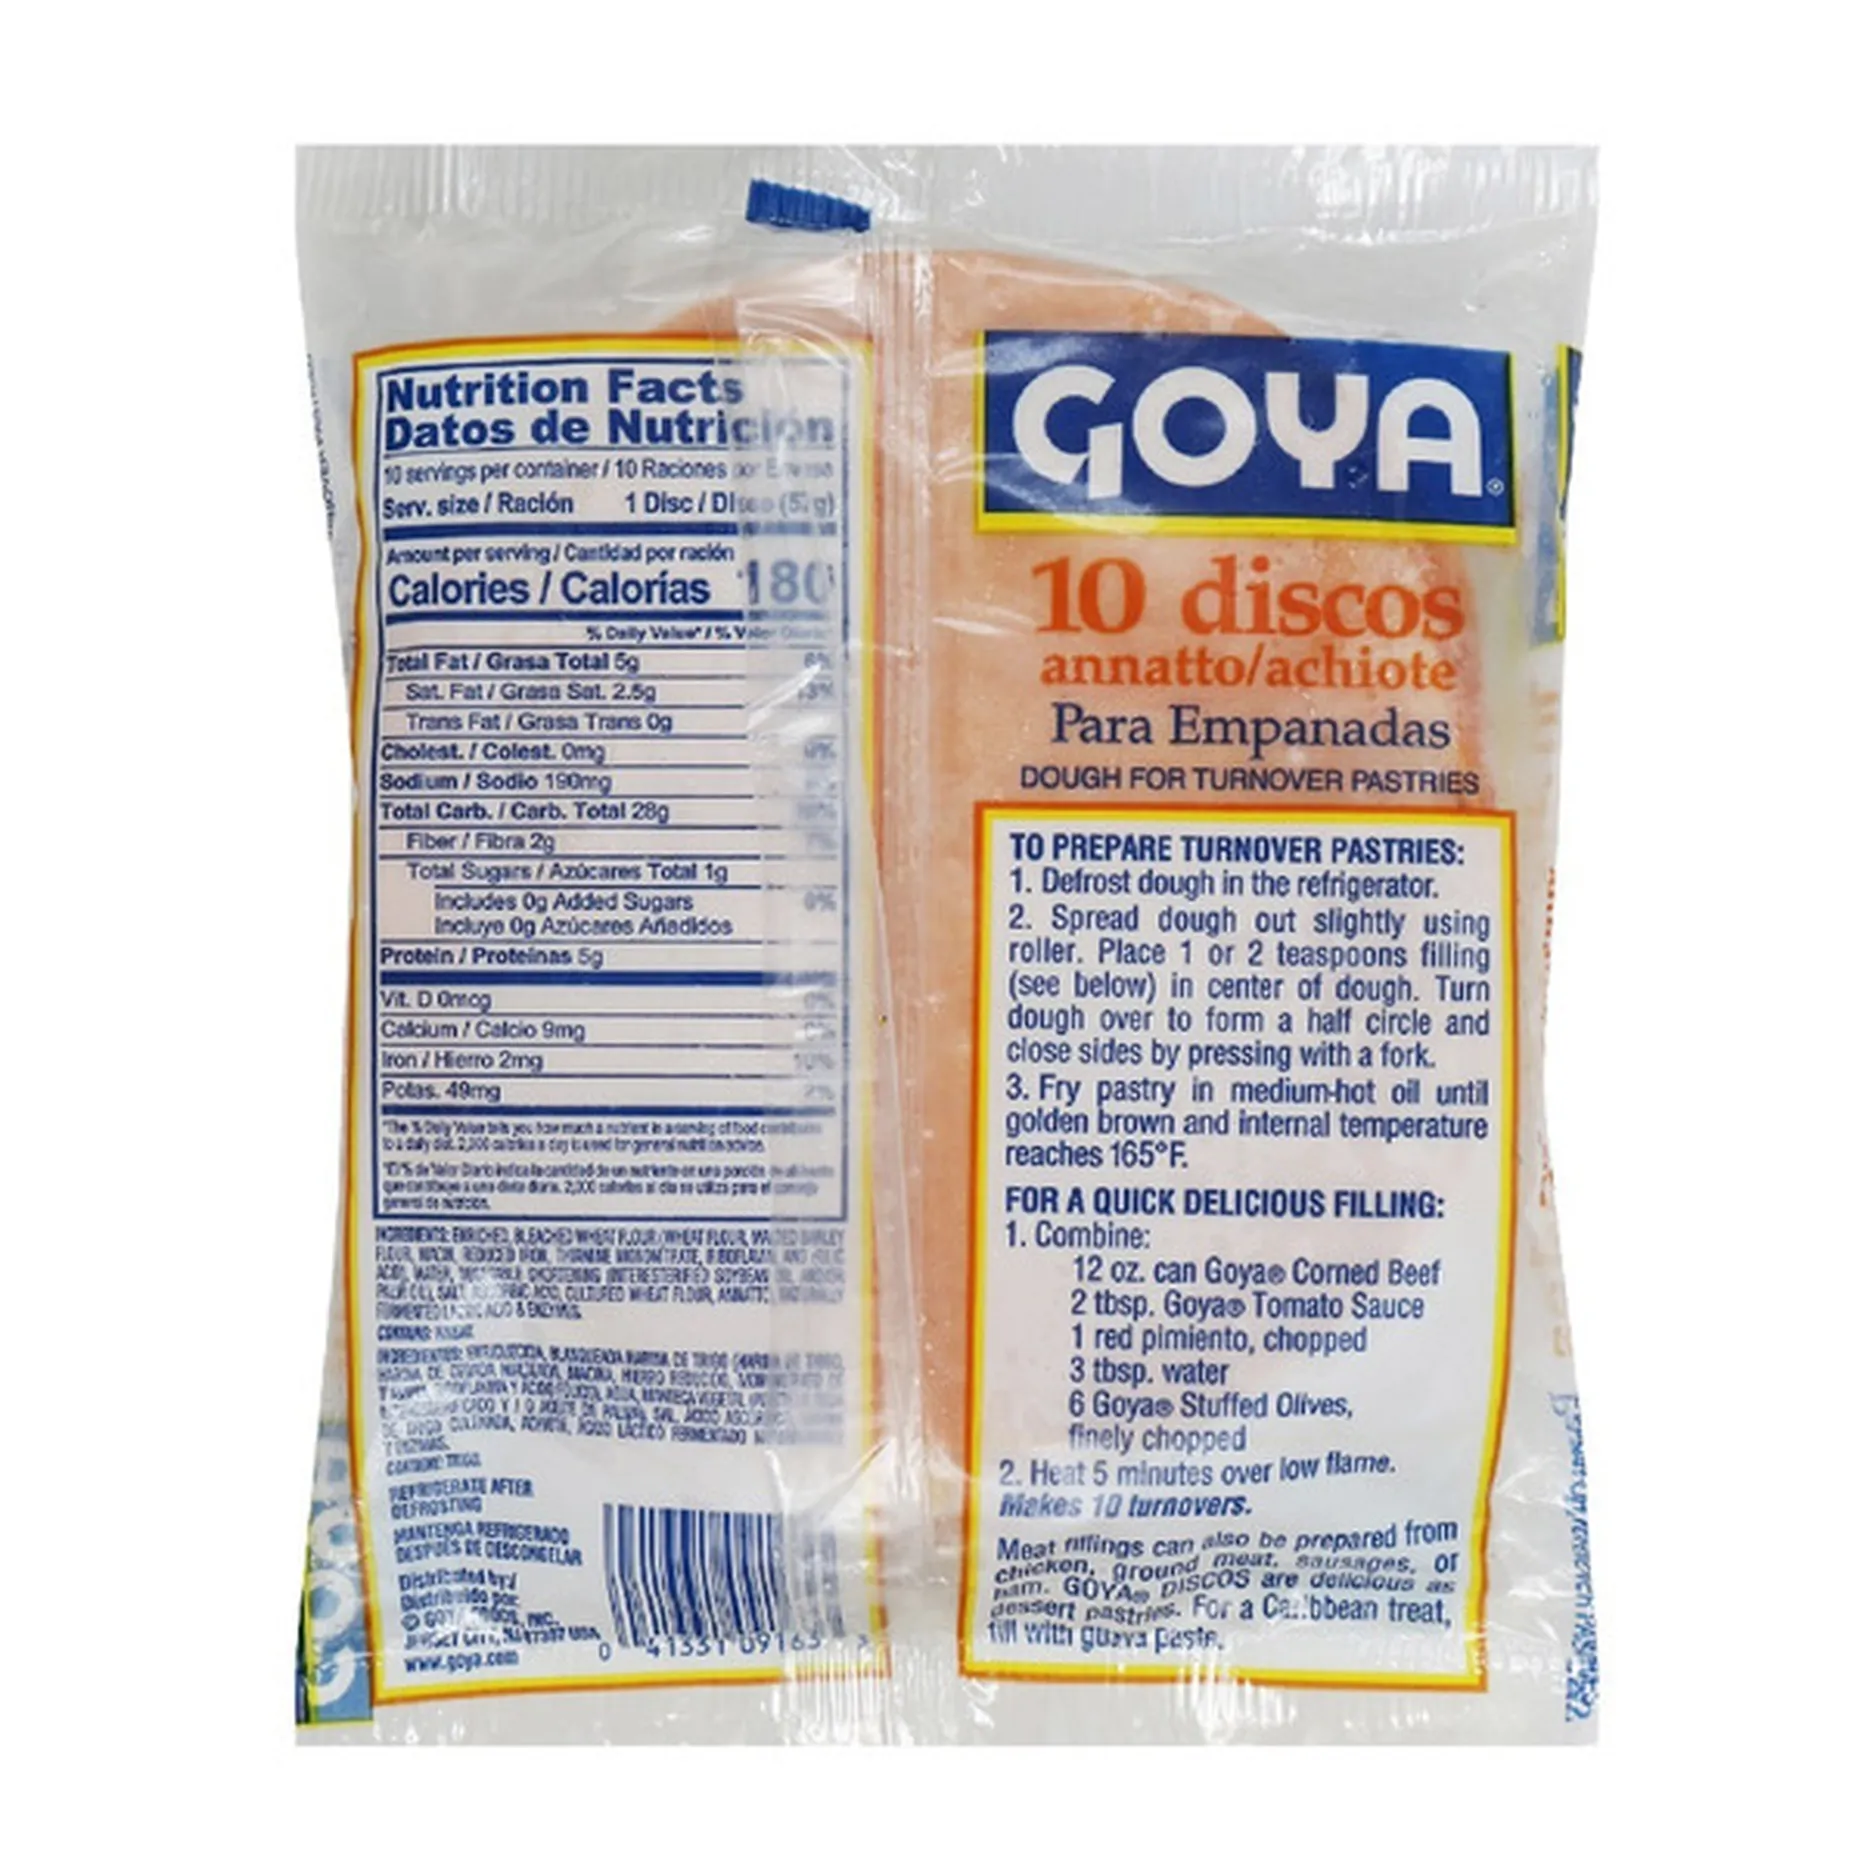 Goya Empanada Dough Discs For Turnover Pastries With Annatto 20 Oz Delivery Or Pickup Near Me 8847